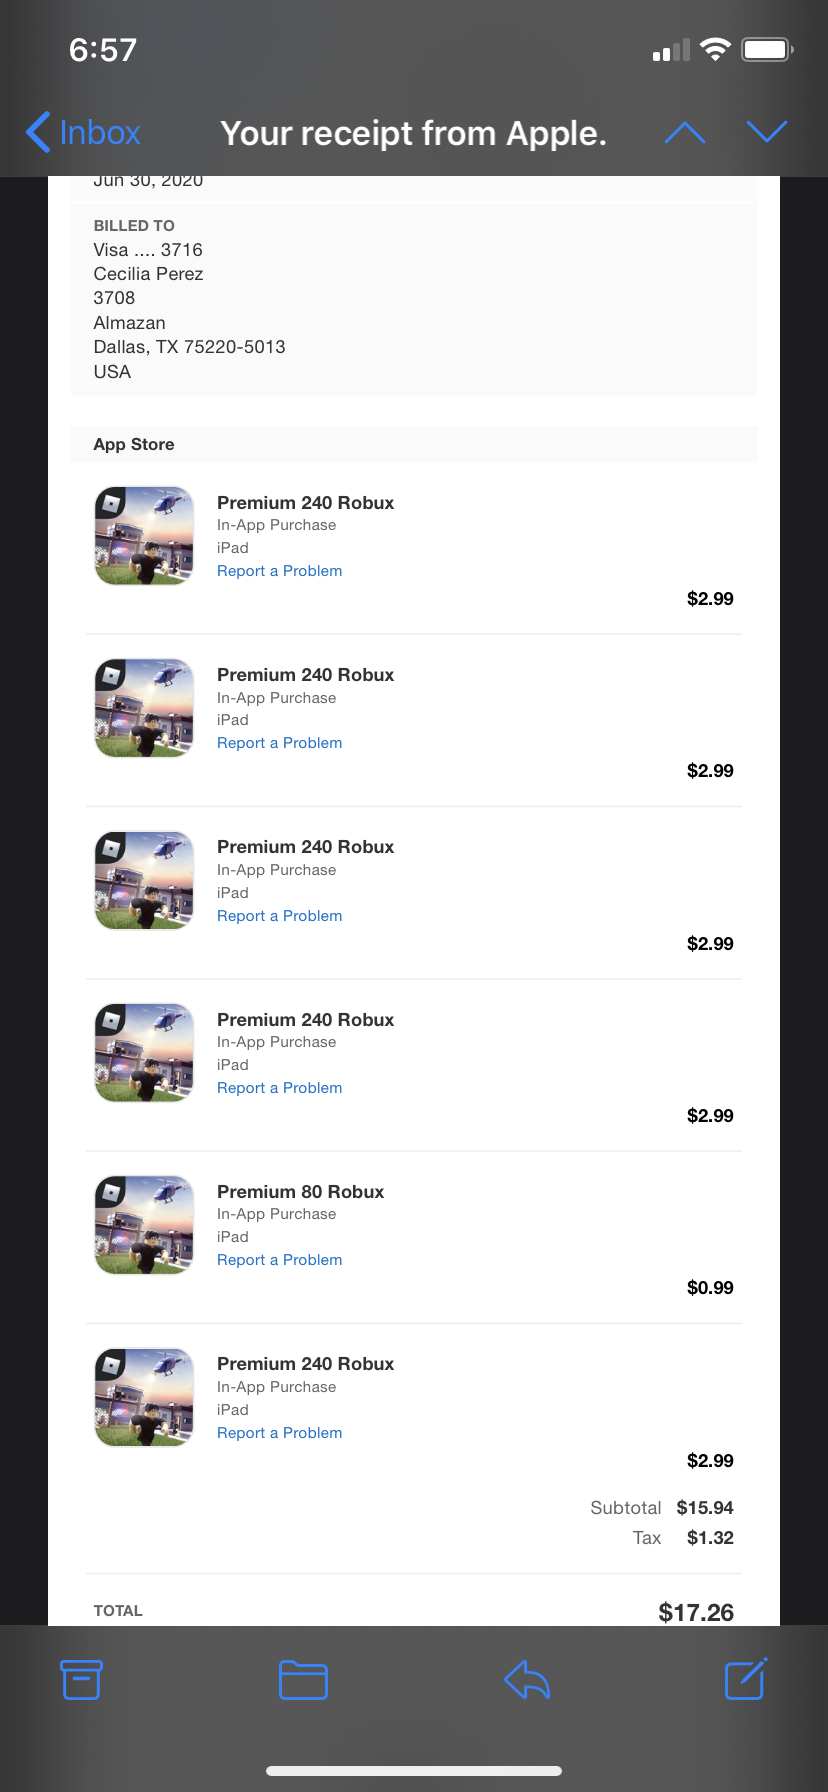 Unarhorized Purchases Apple Community - how to refund robux purchase